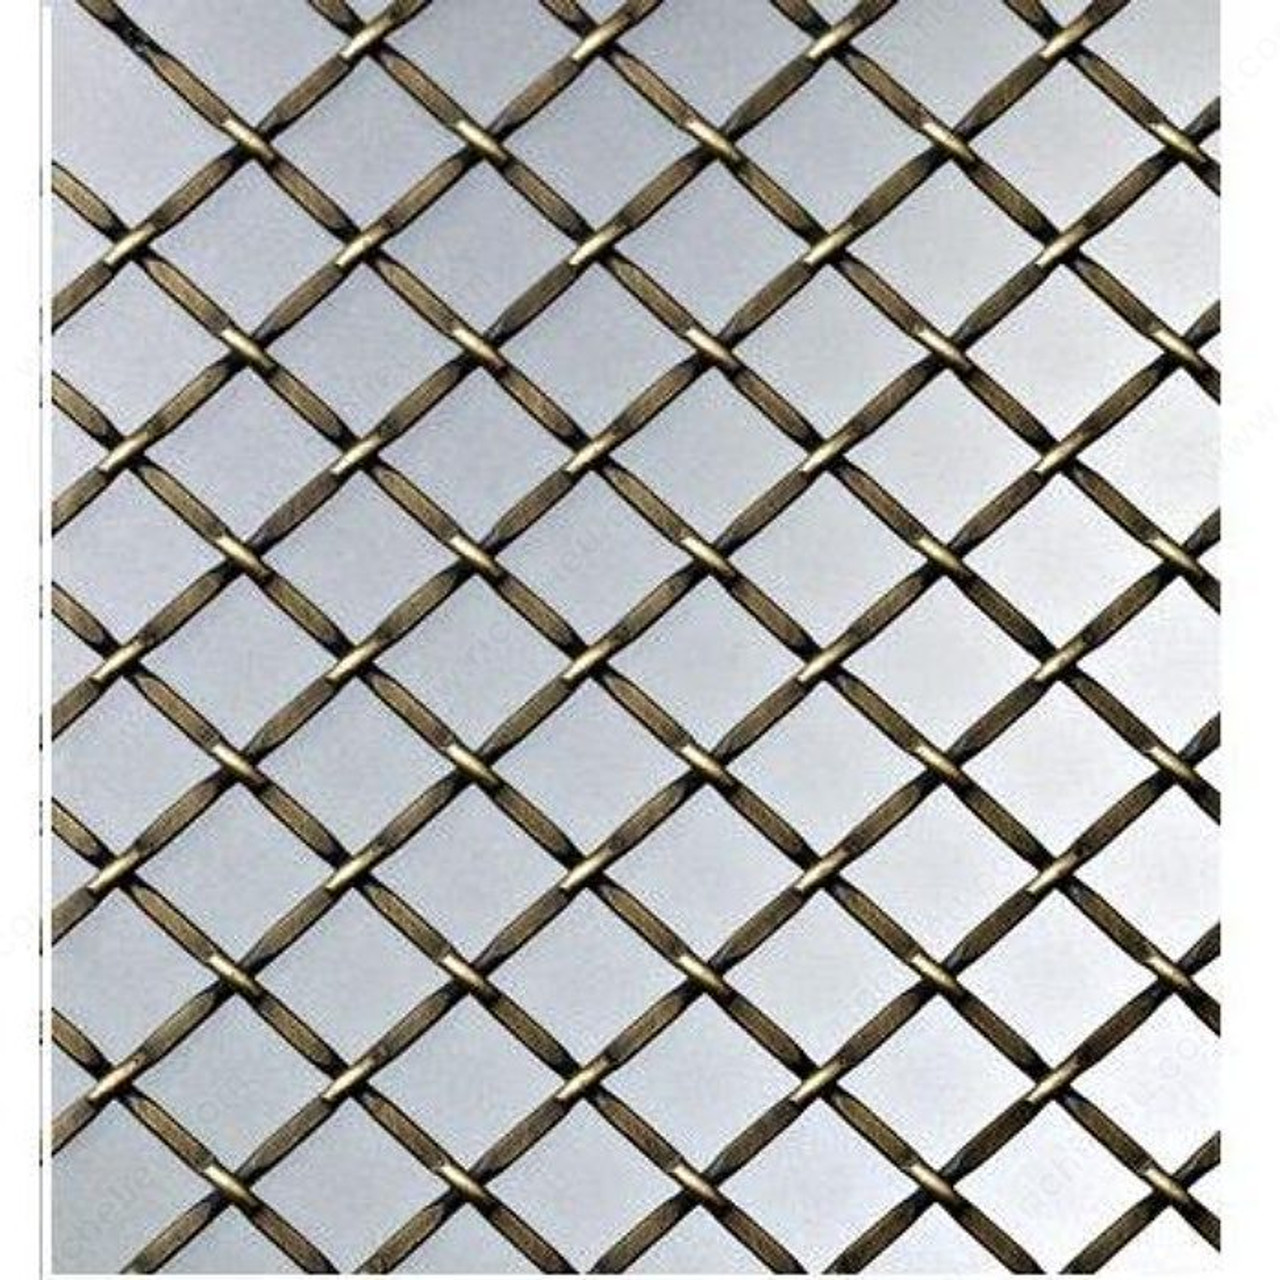 Decorative Wire Mesh - 812, Finish Burnished Brass, Width - Overall  Dimensions 48 in, Projection - Overall Dimensions 72 in